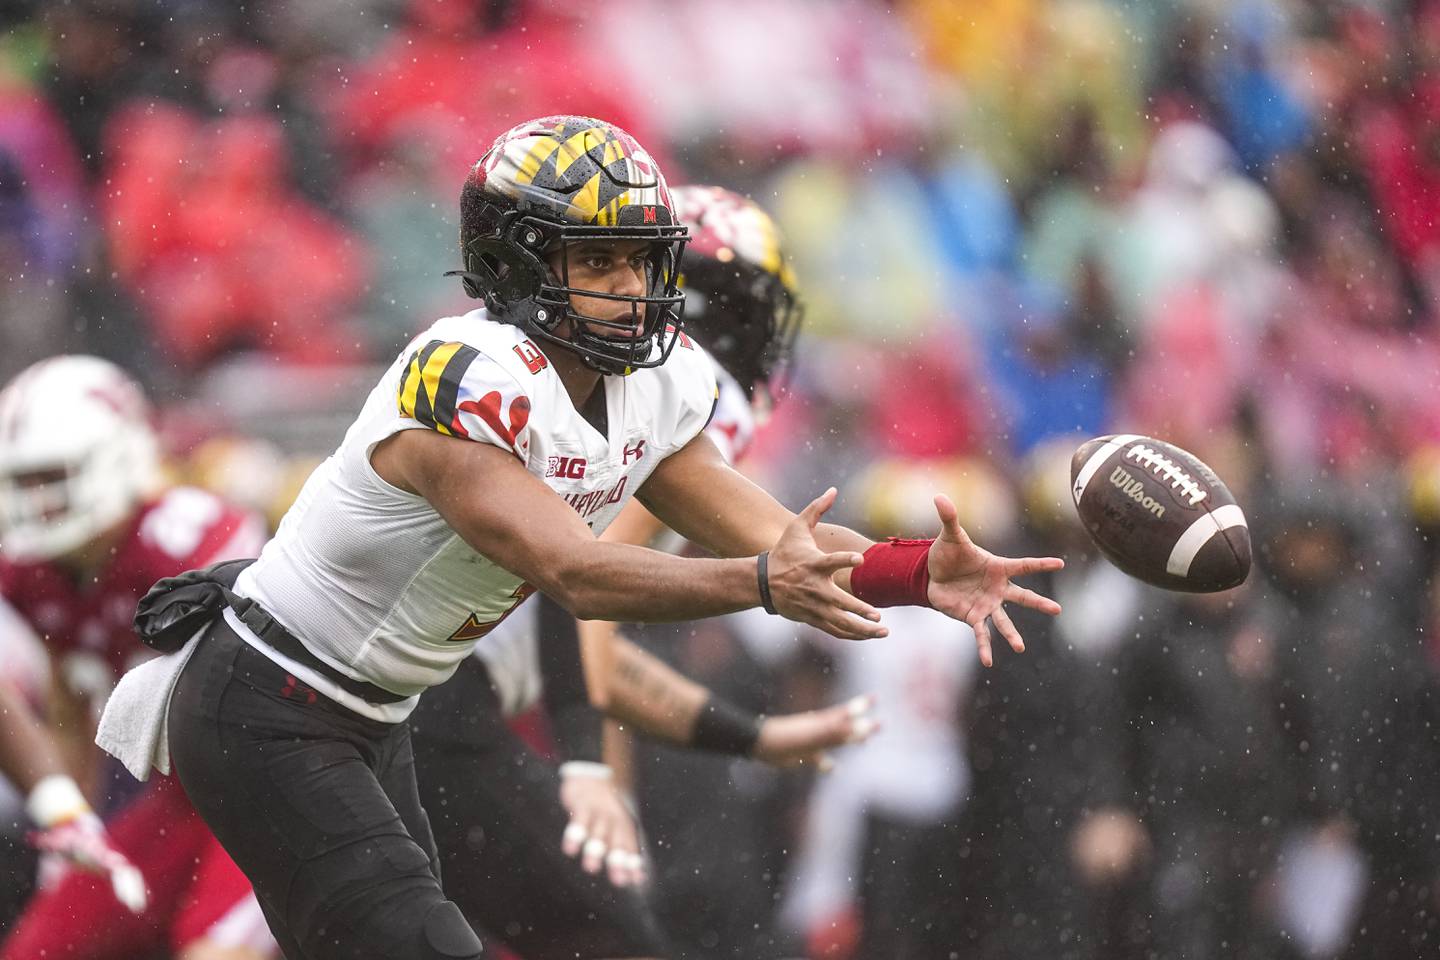 Maryland quarterback Taulia Tagovailoa (3) pitches the ball off during the first half of an NCAA college football game against Wisconsin Saturday, Nov. 5, 2022, in Madison, Wis.